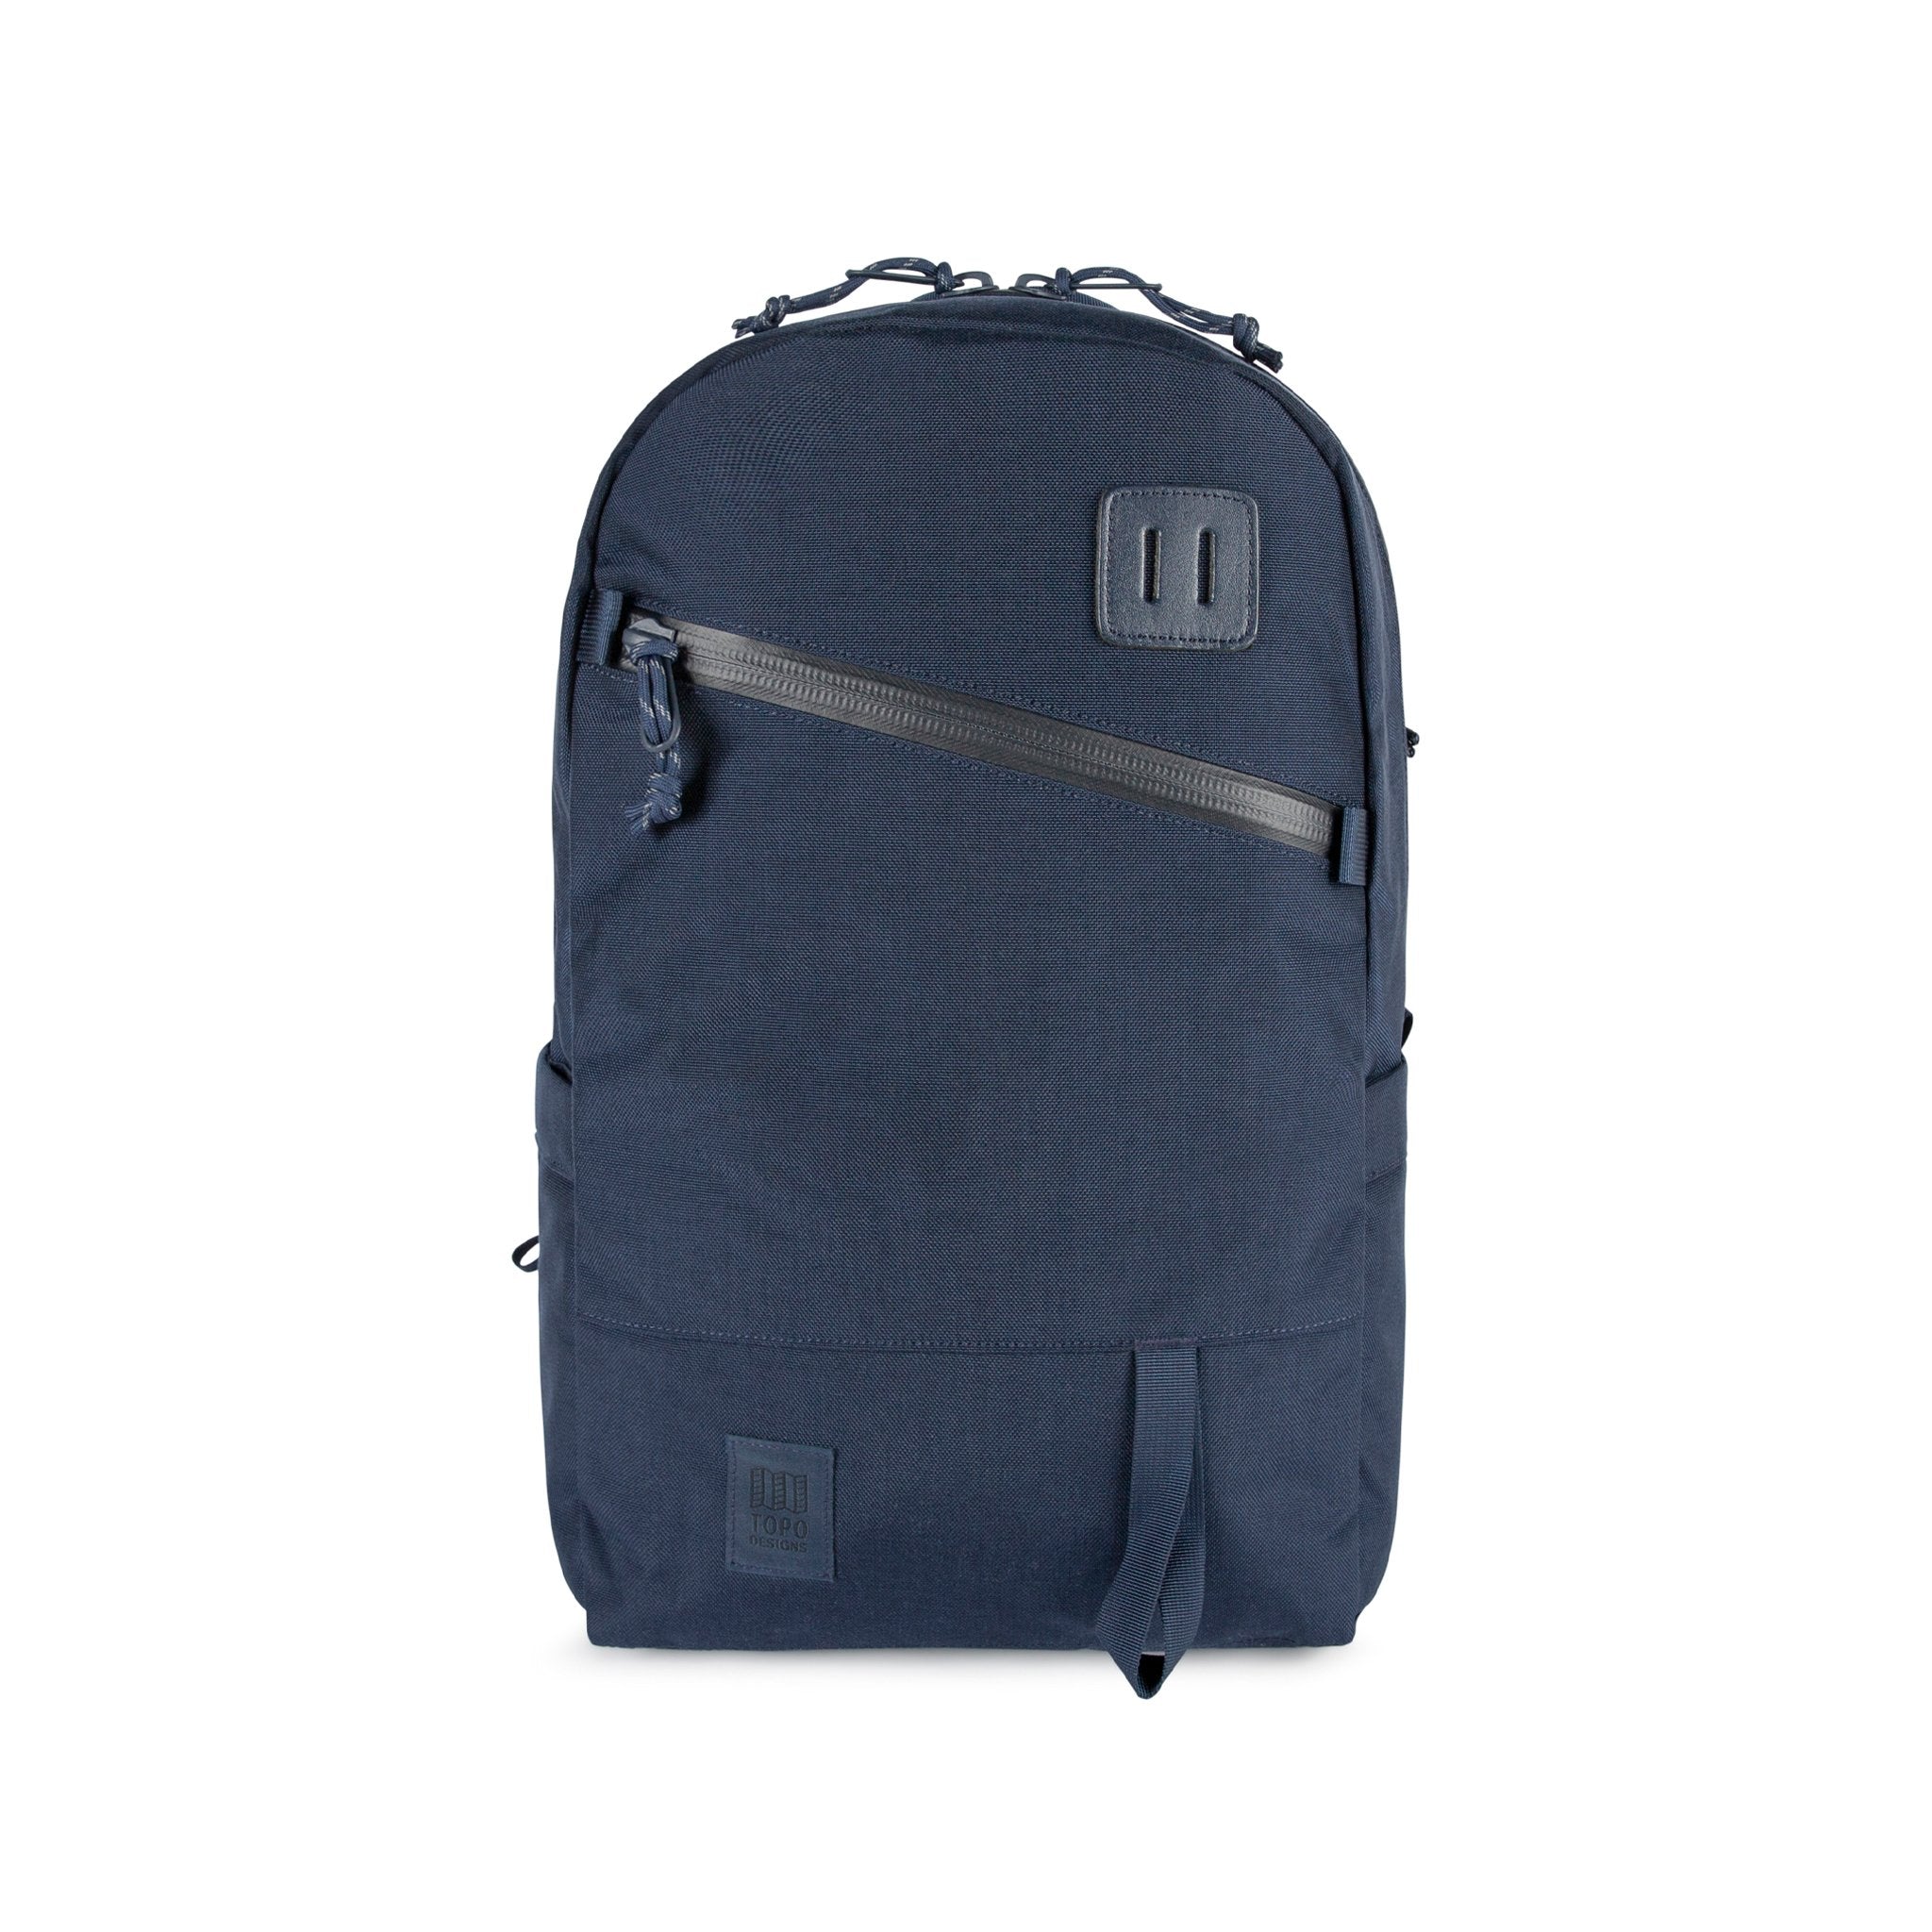 Topo Designs Daypack Tech 100% recycled nylon backpack with external laptop access in "Navy" blue.